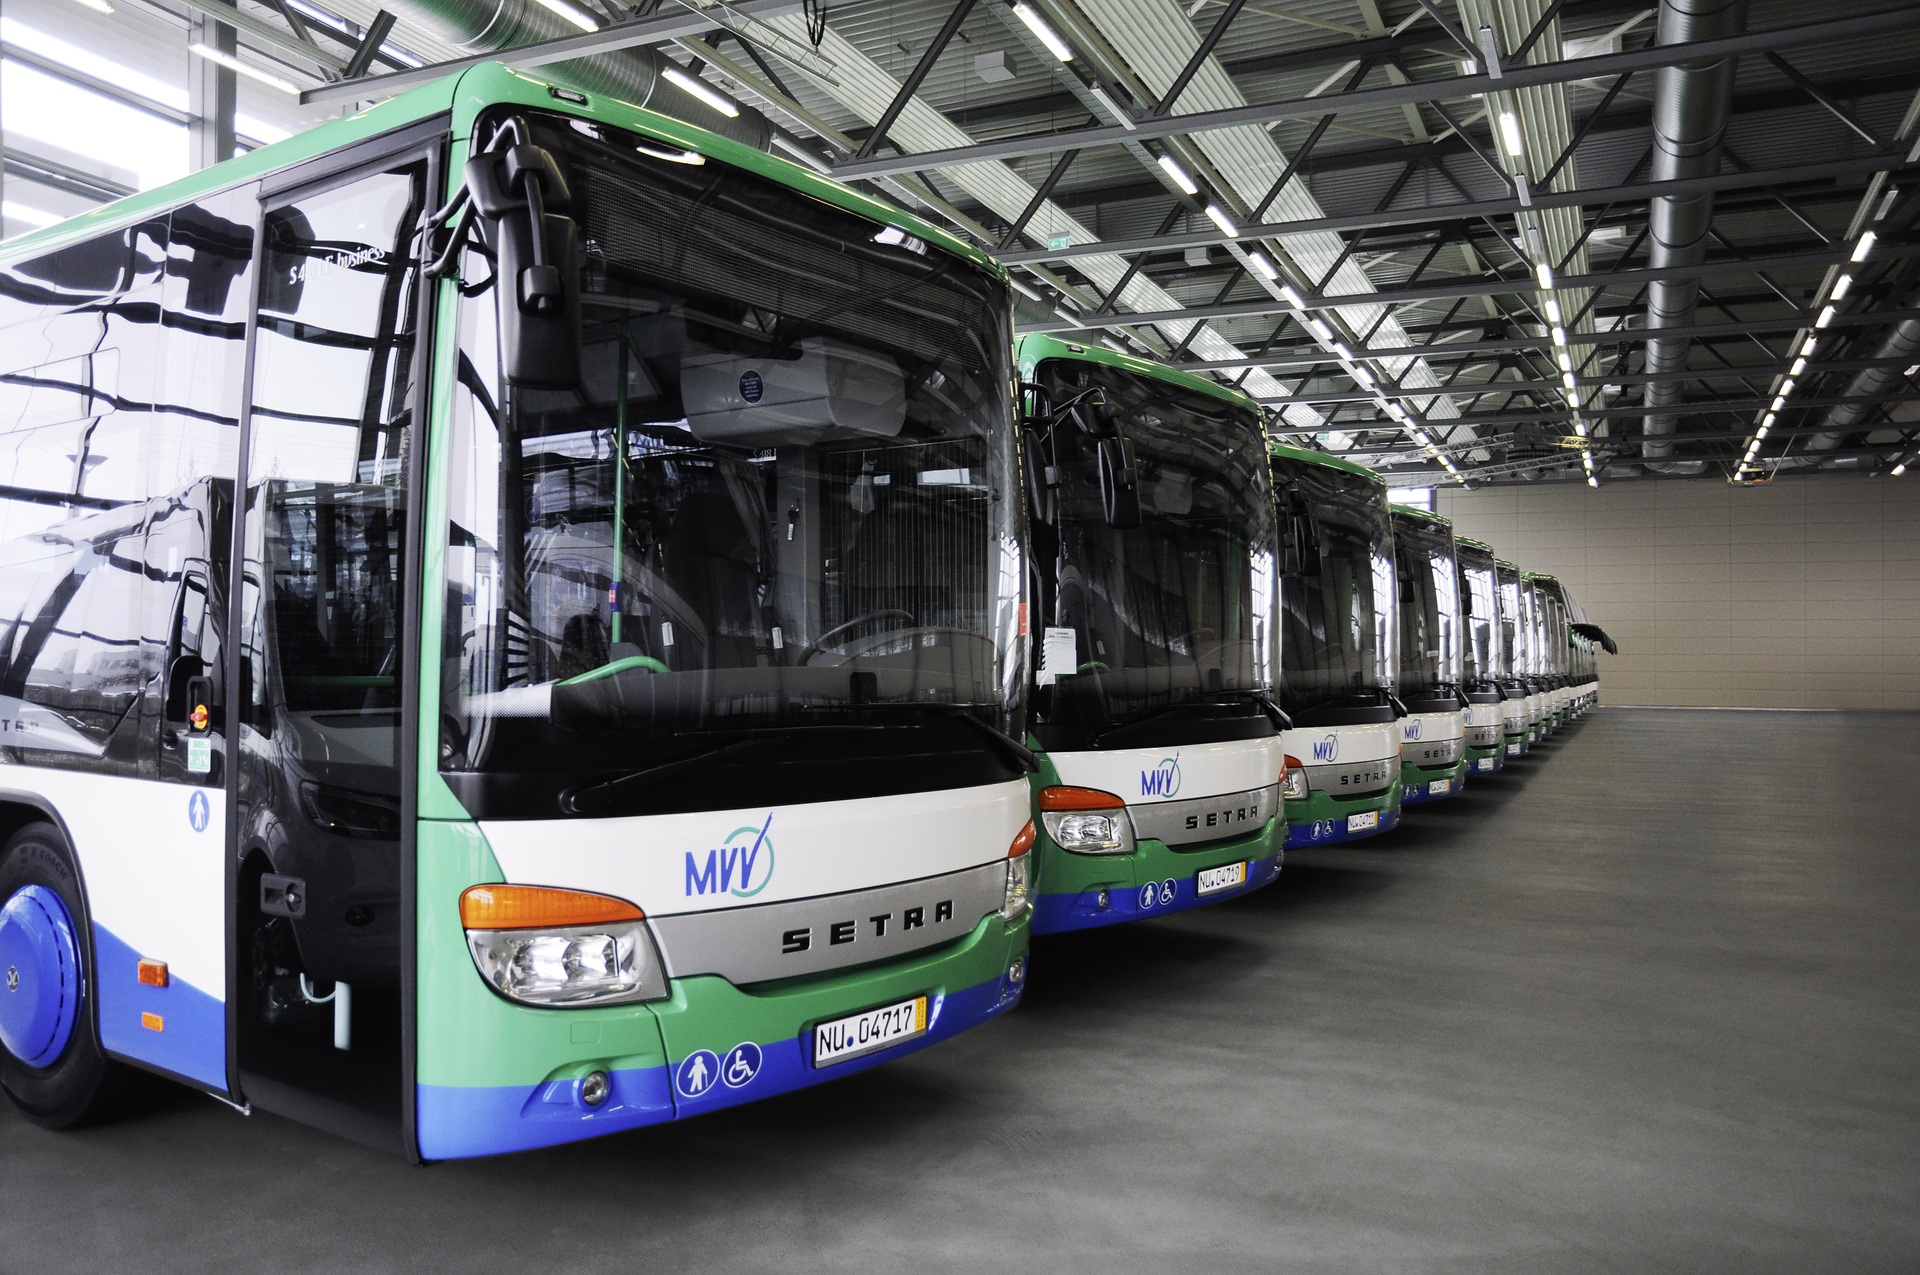 19 new Setra buses for Geldhauser